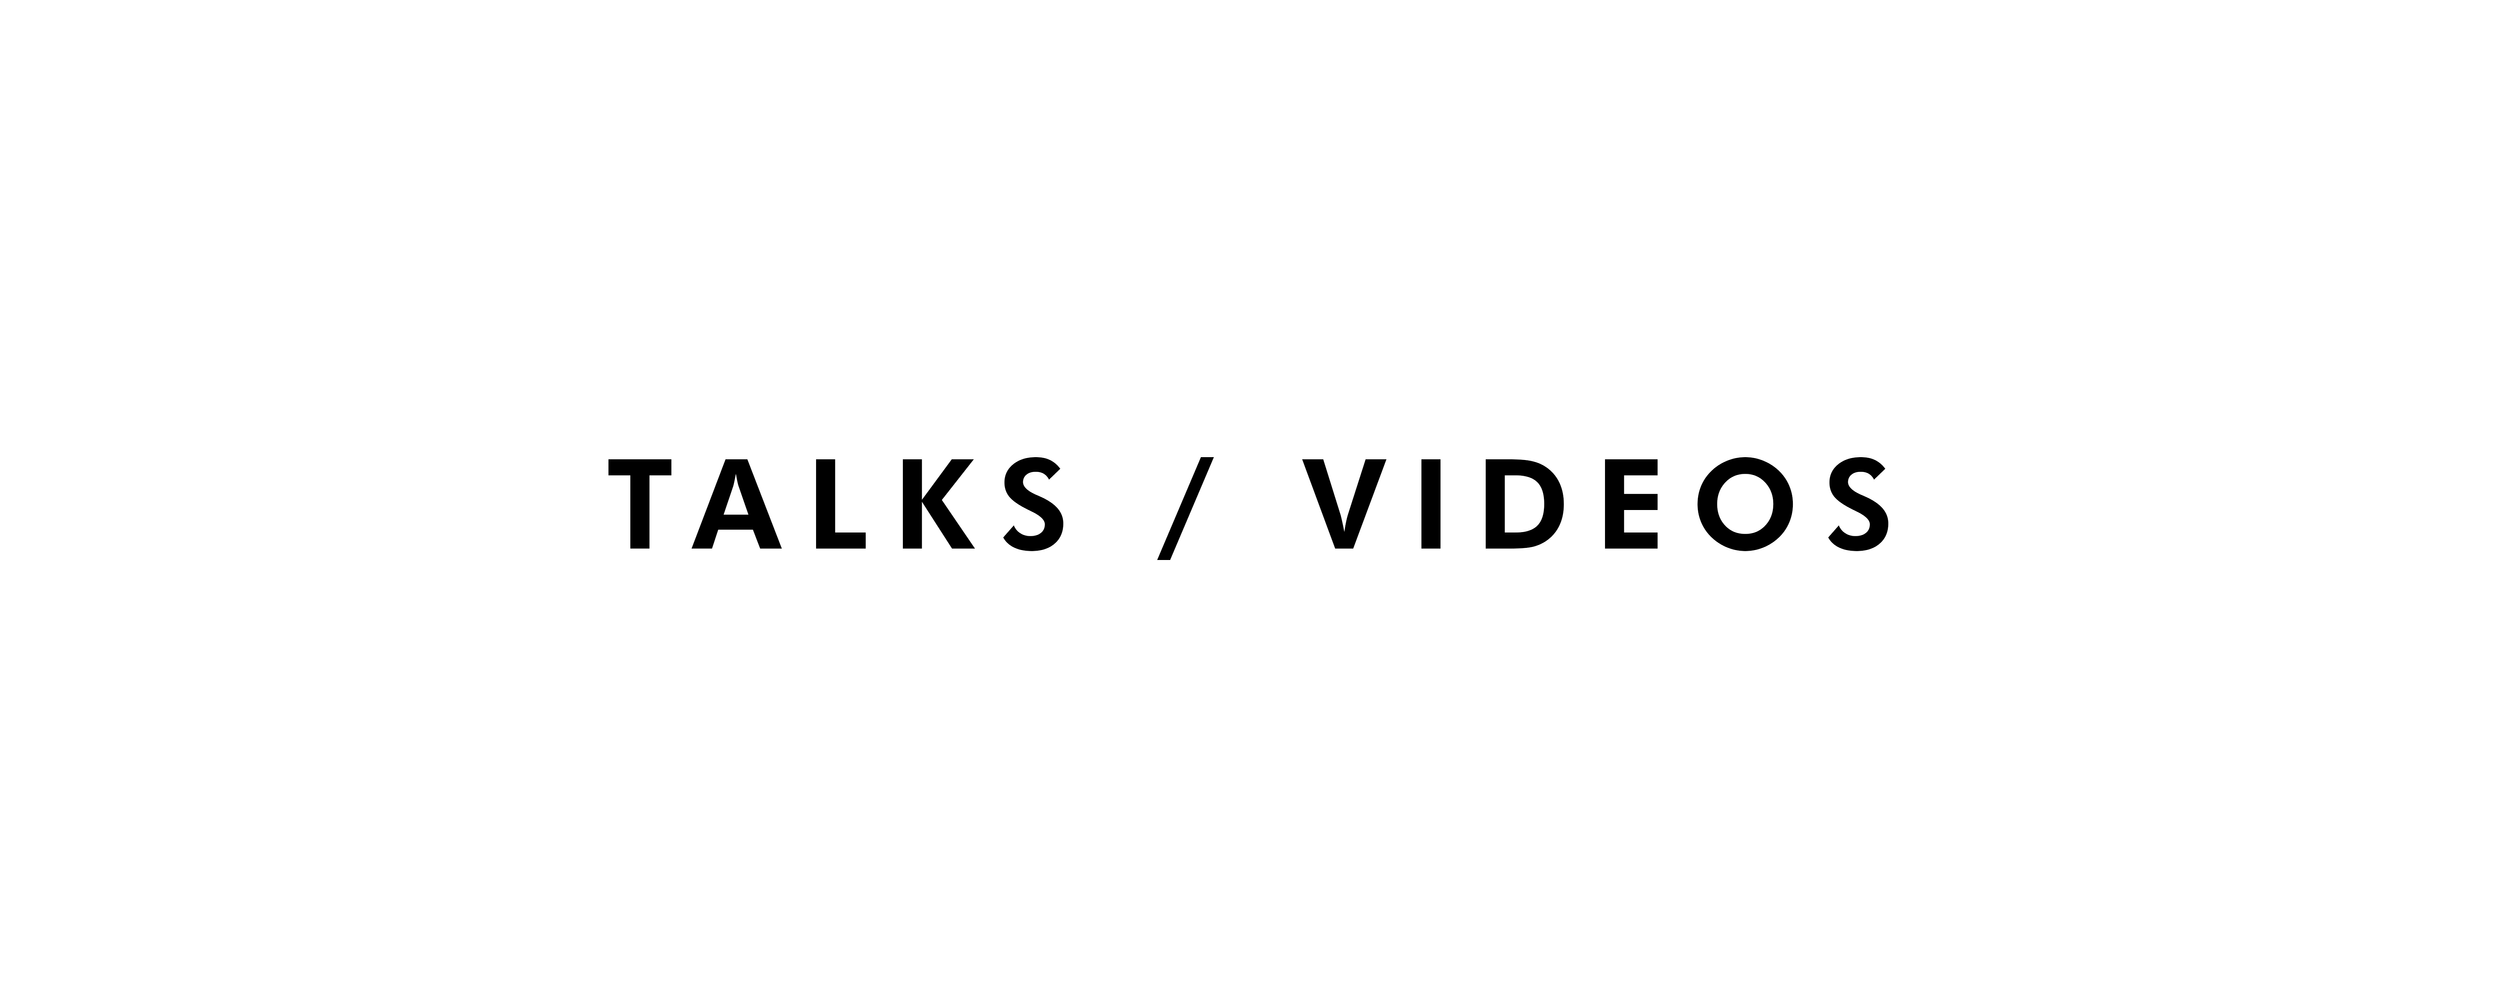 About_talks-videos_bold.png